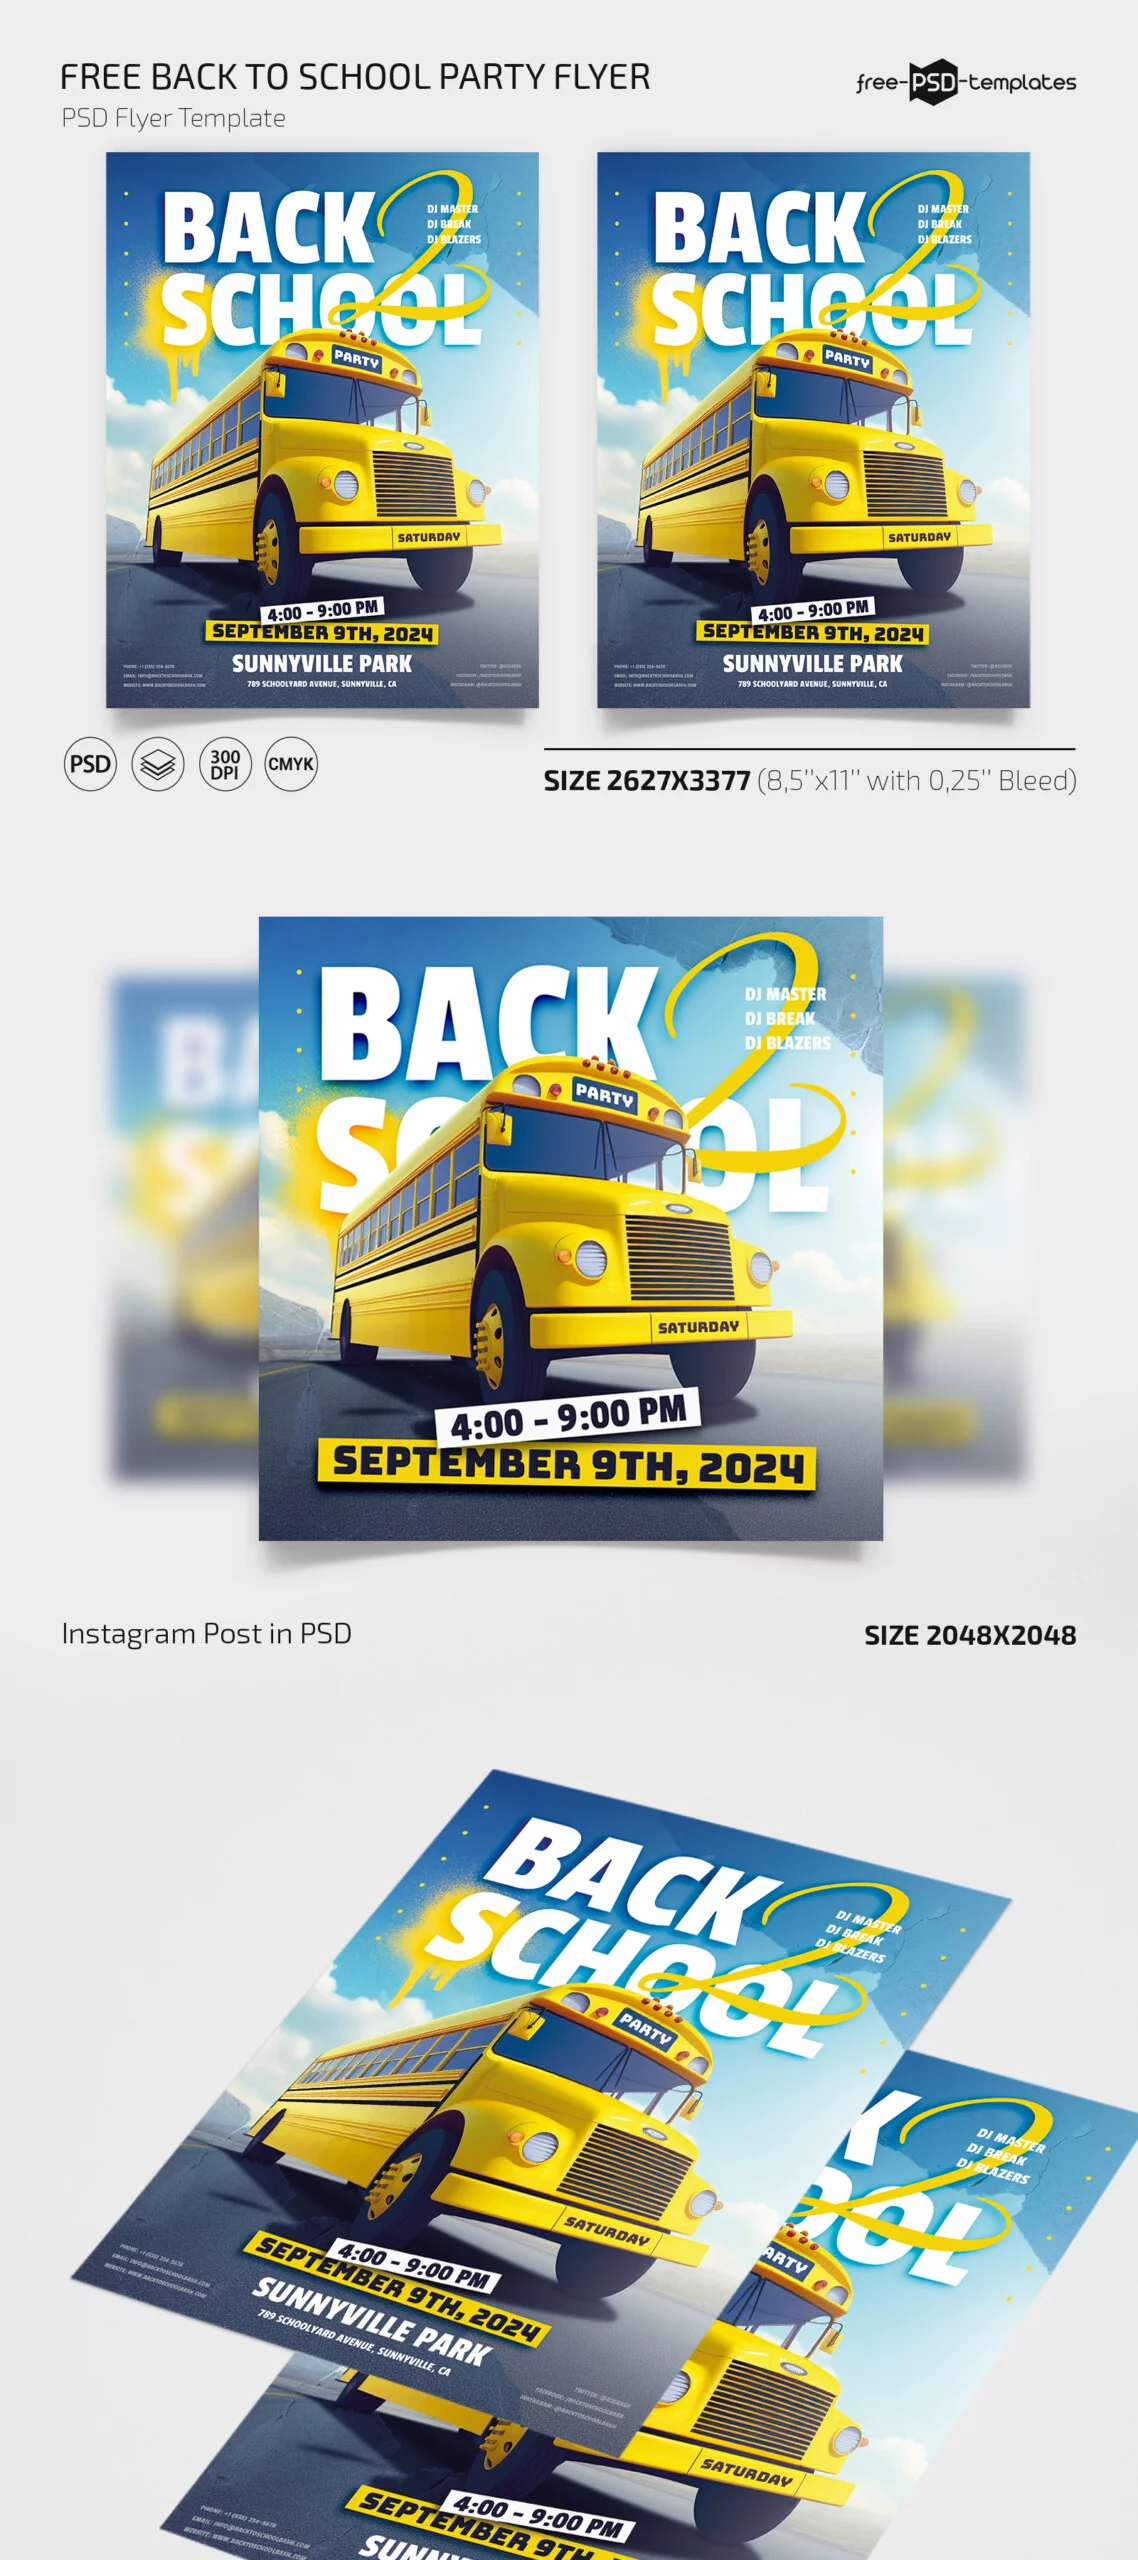 Free Back to School Party Flyer PSD Template